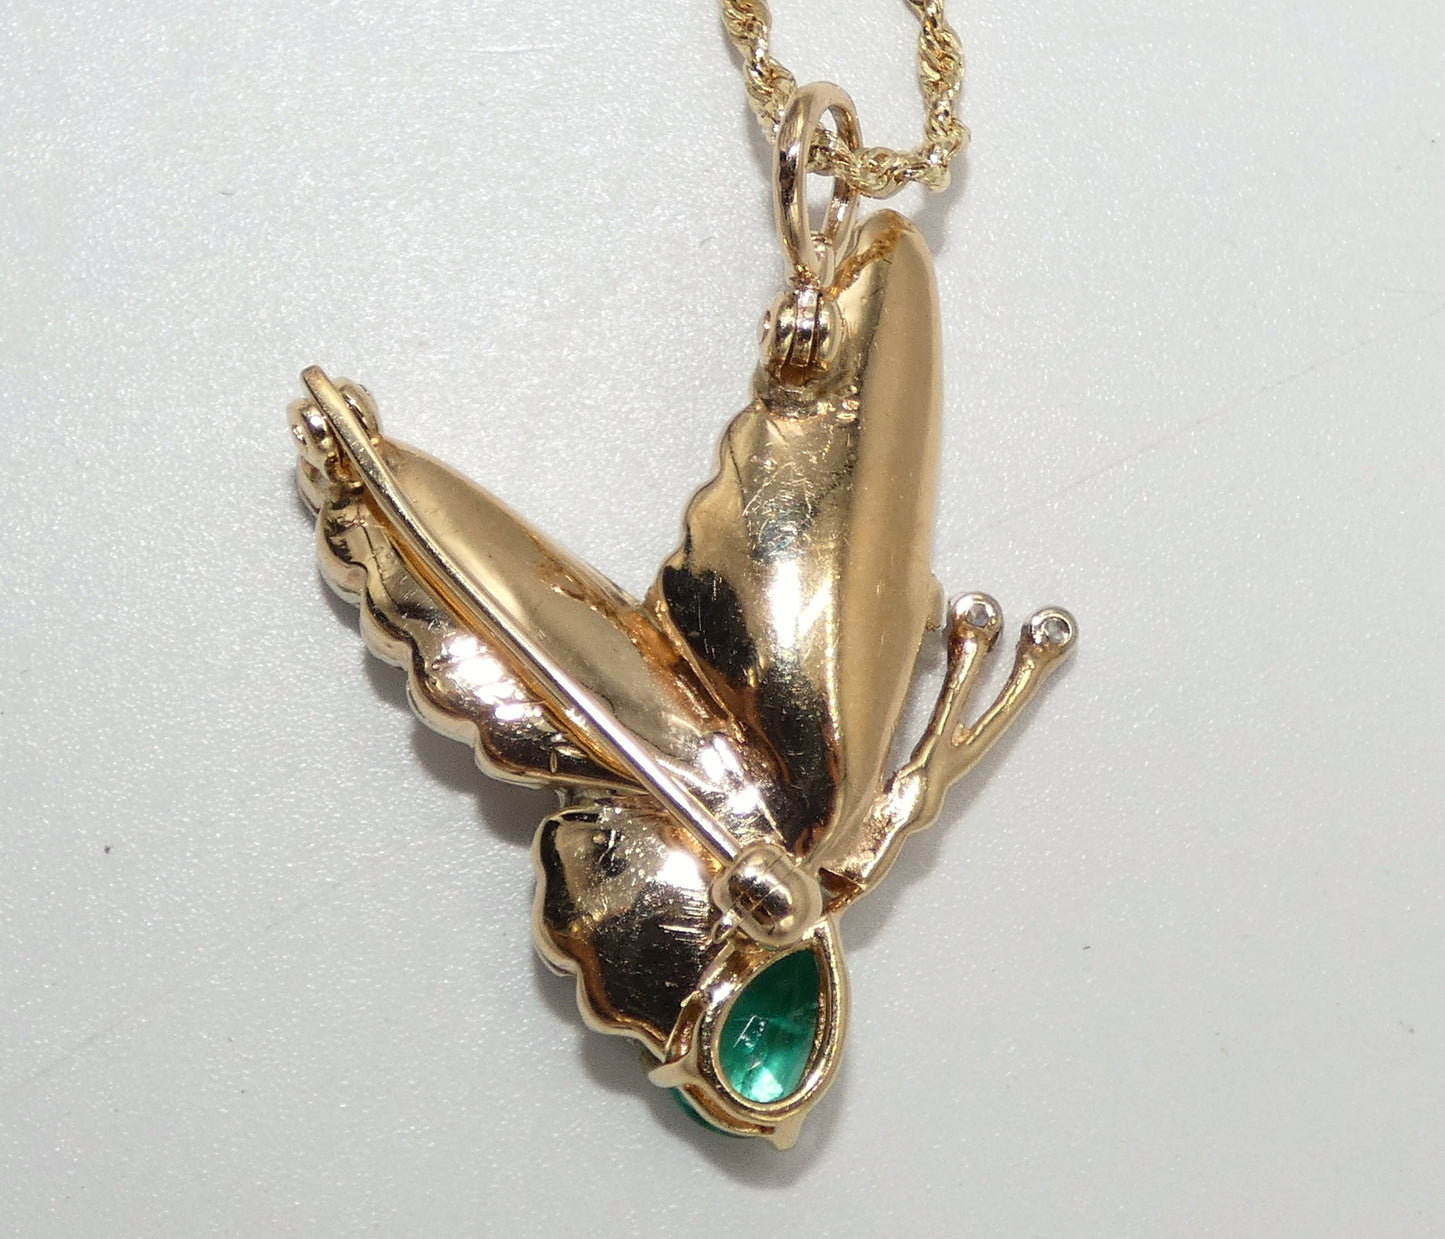 14K Gold Butterfly Pin/ Pendant with Emerald & Diamonds